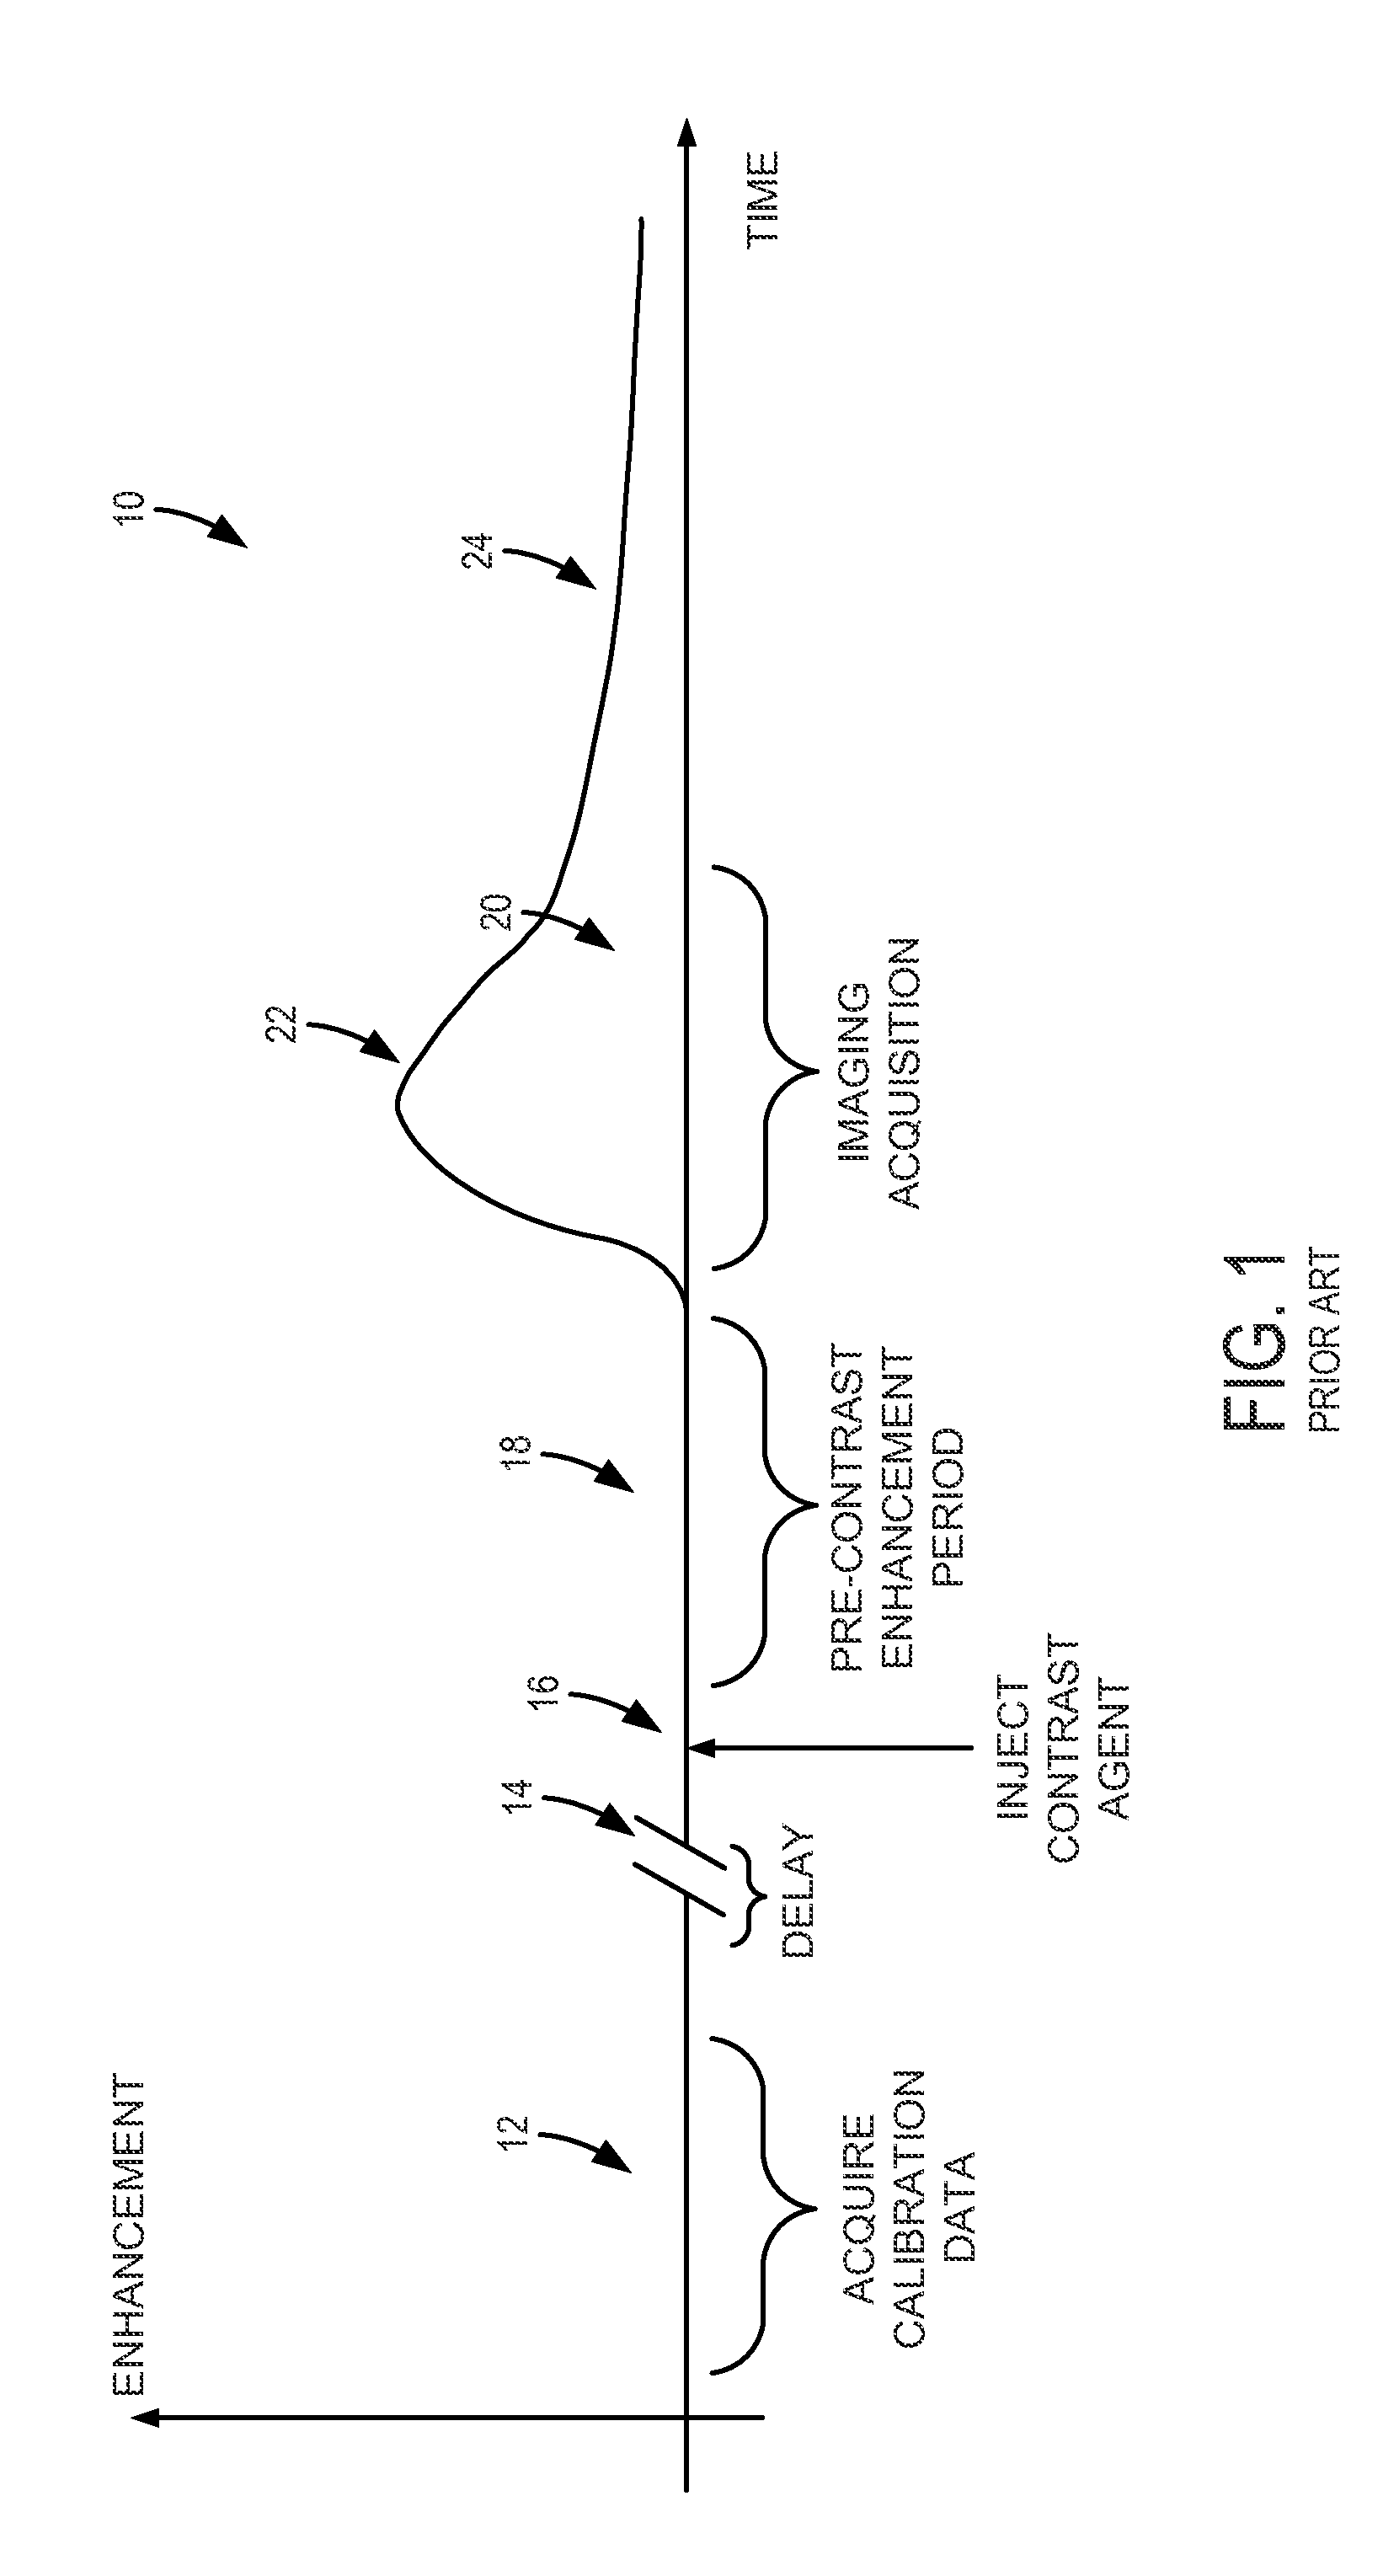 System and method for controlling calibration and delay phases of parallel, contrast-enhanced magnetic resonance imaging